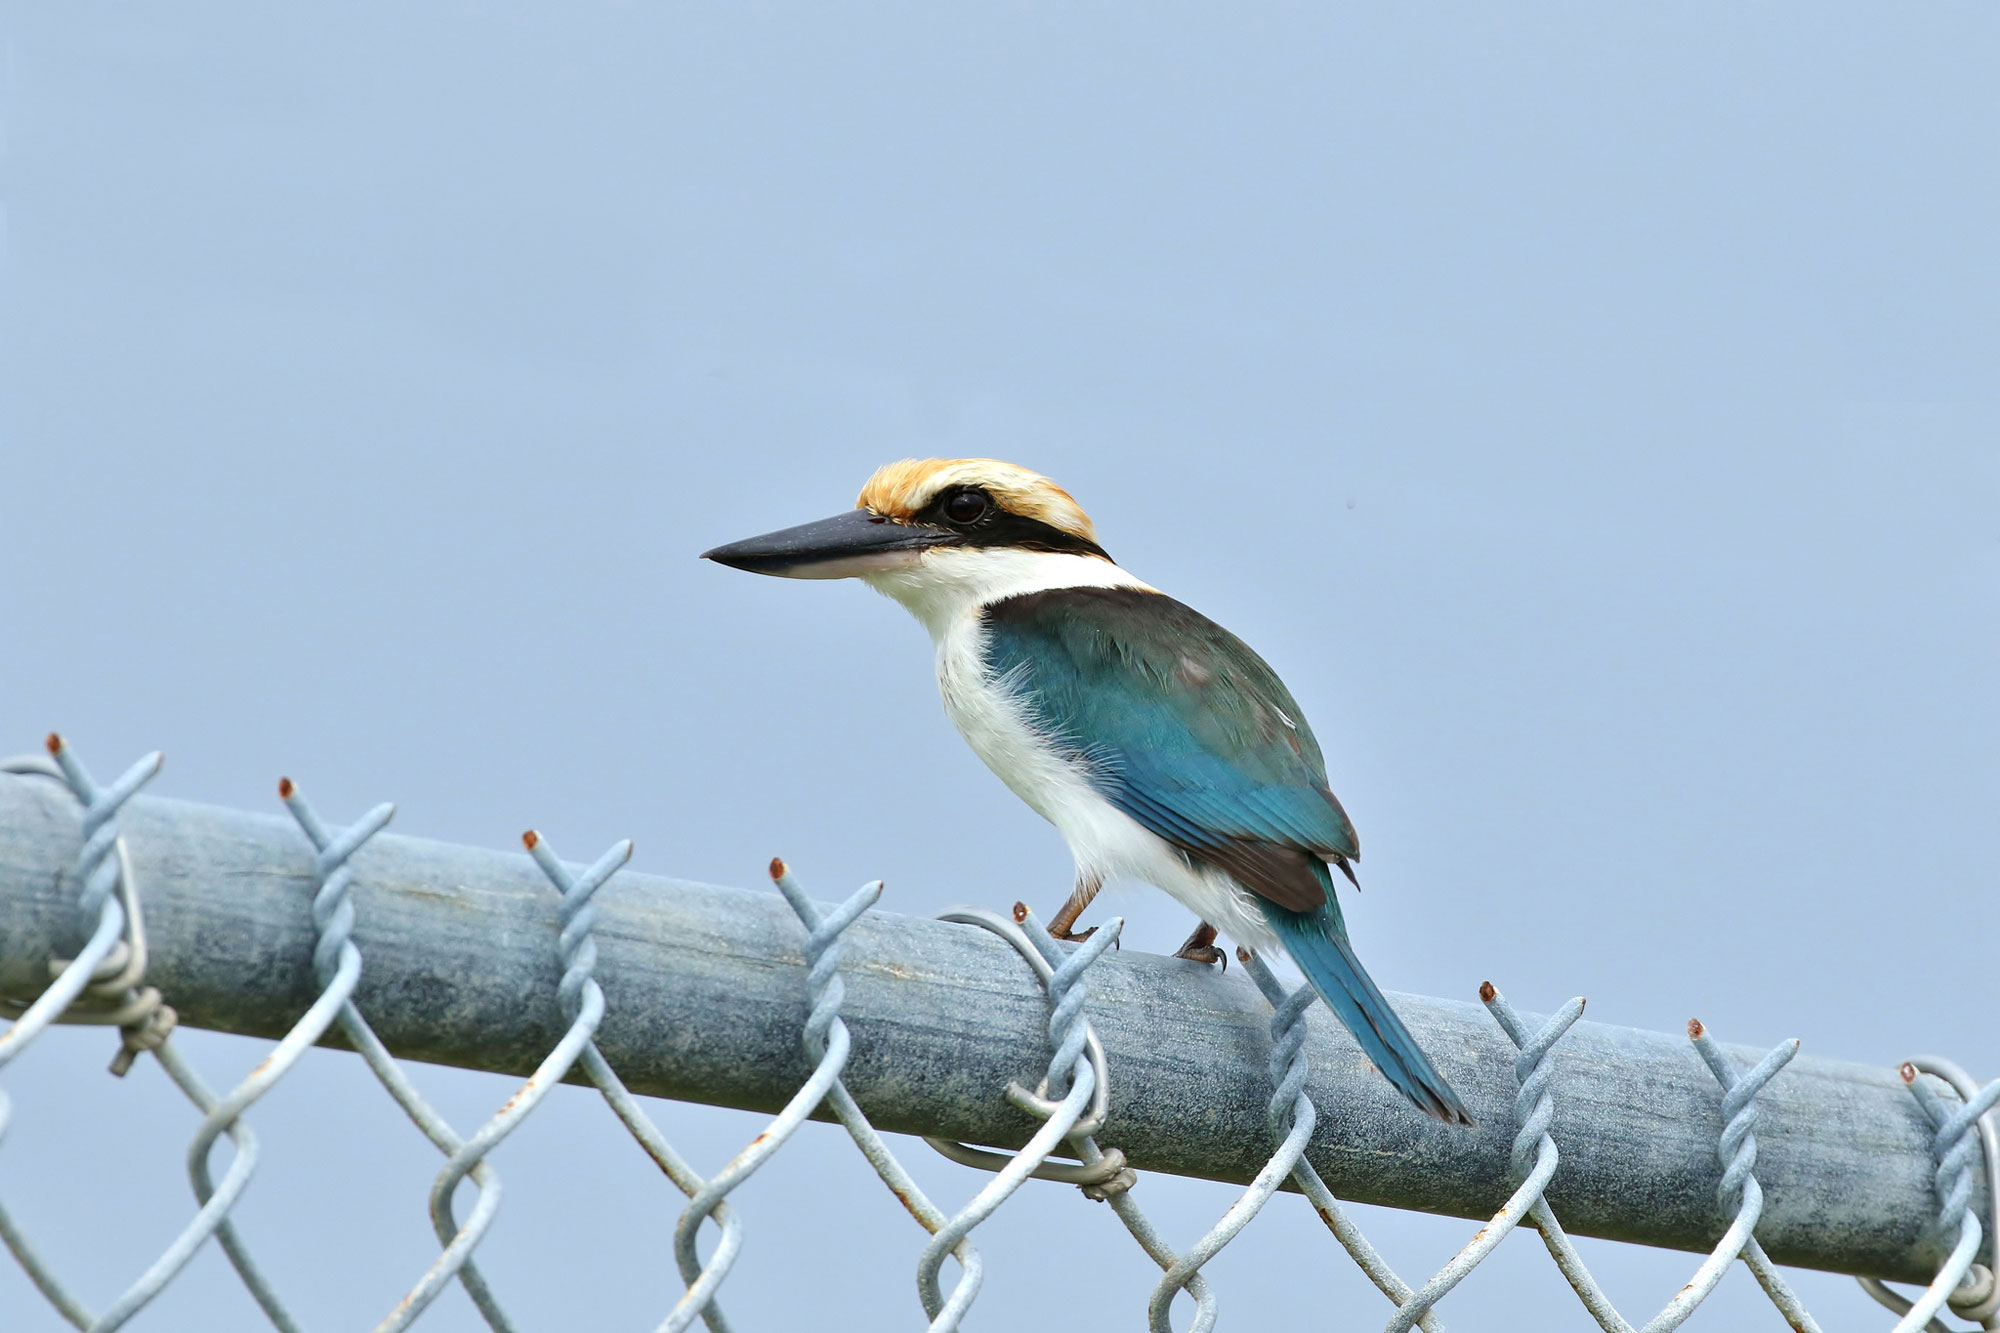 Photograph of a Pohnpei kingfisher sitting on a chainlink fence. The photo shows a bird with a large black and white beak, a white head with black stripe, a white neck, throat, and breast, and blue wings and a tail.